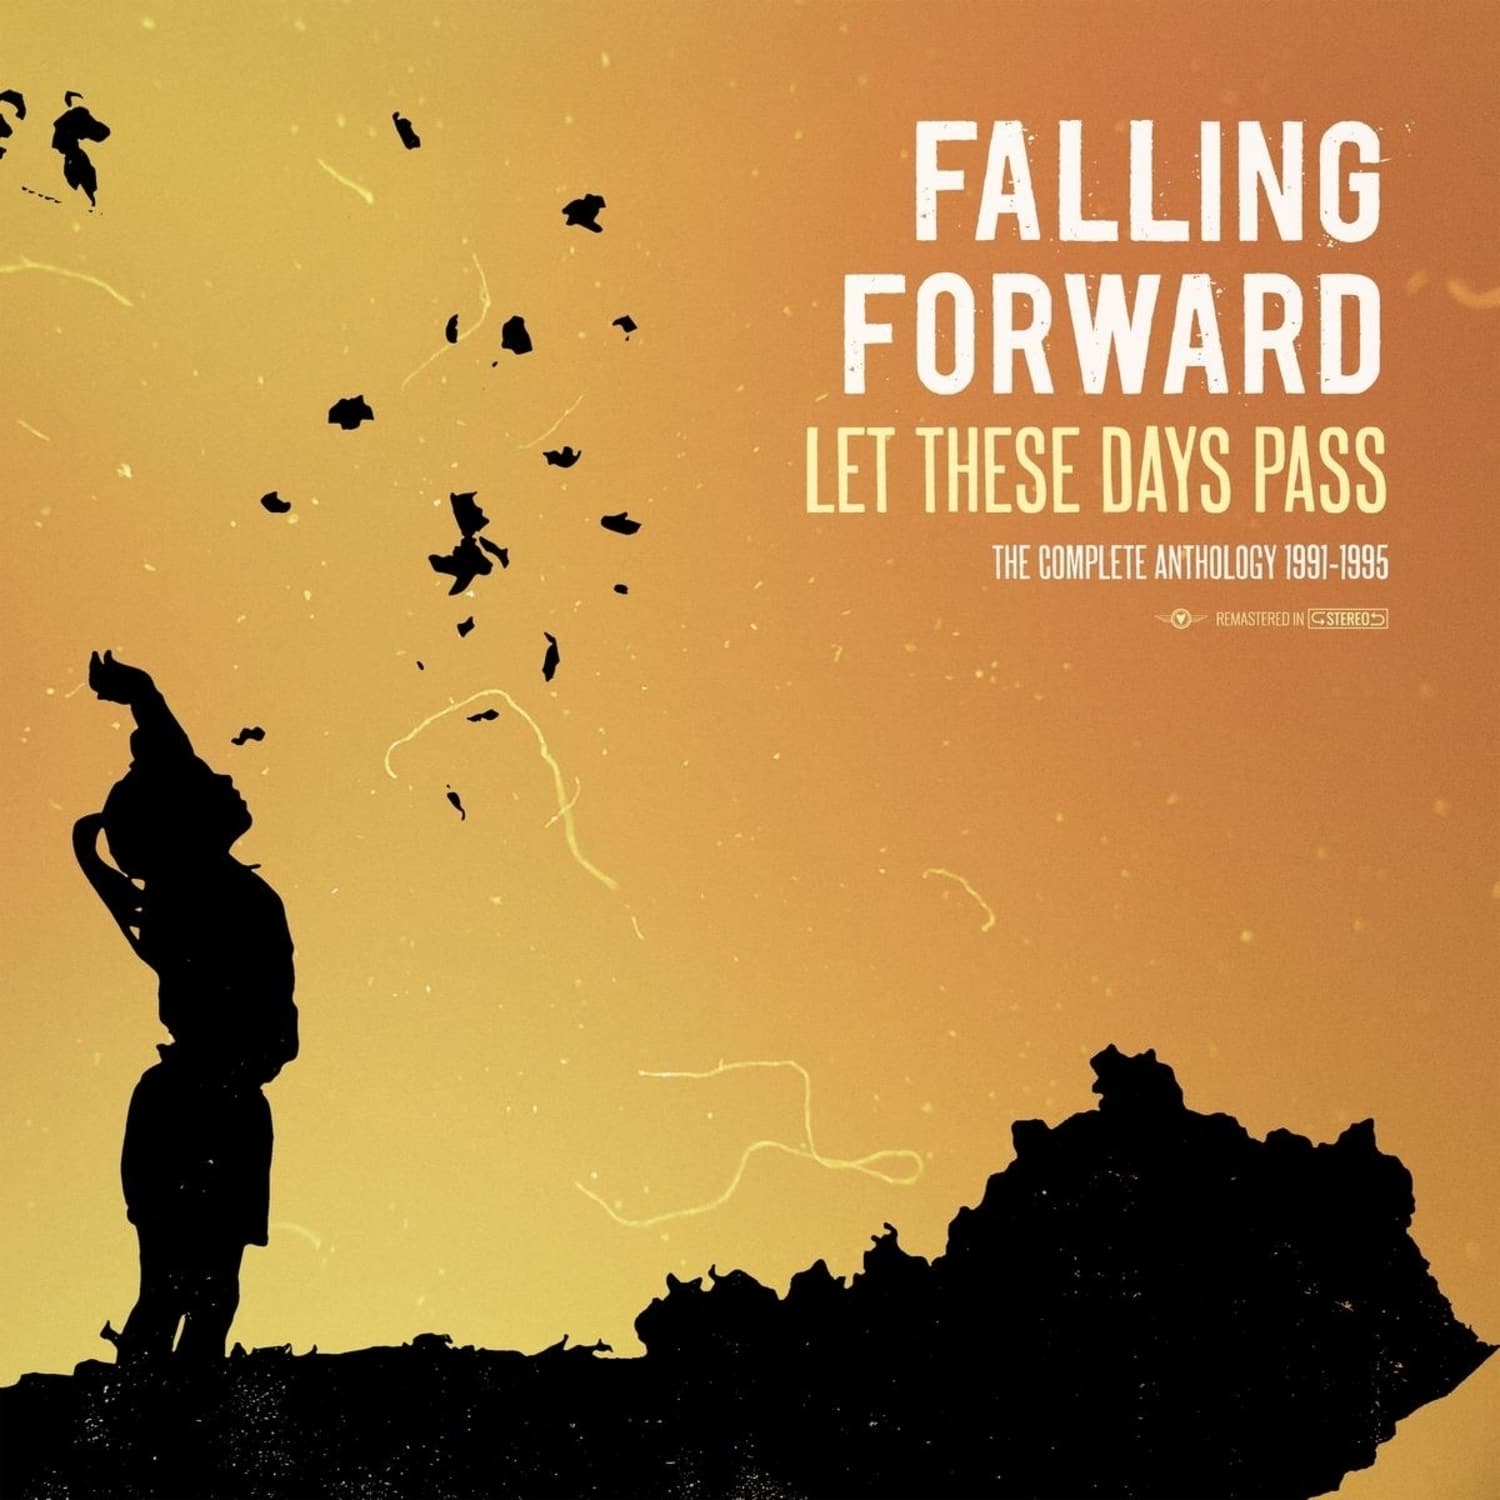 Falling Forward - LET THESE DAYS PASS: THE COMPLETE ANTHOLOGY 1991-1 